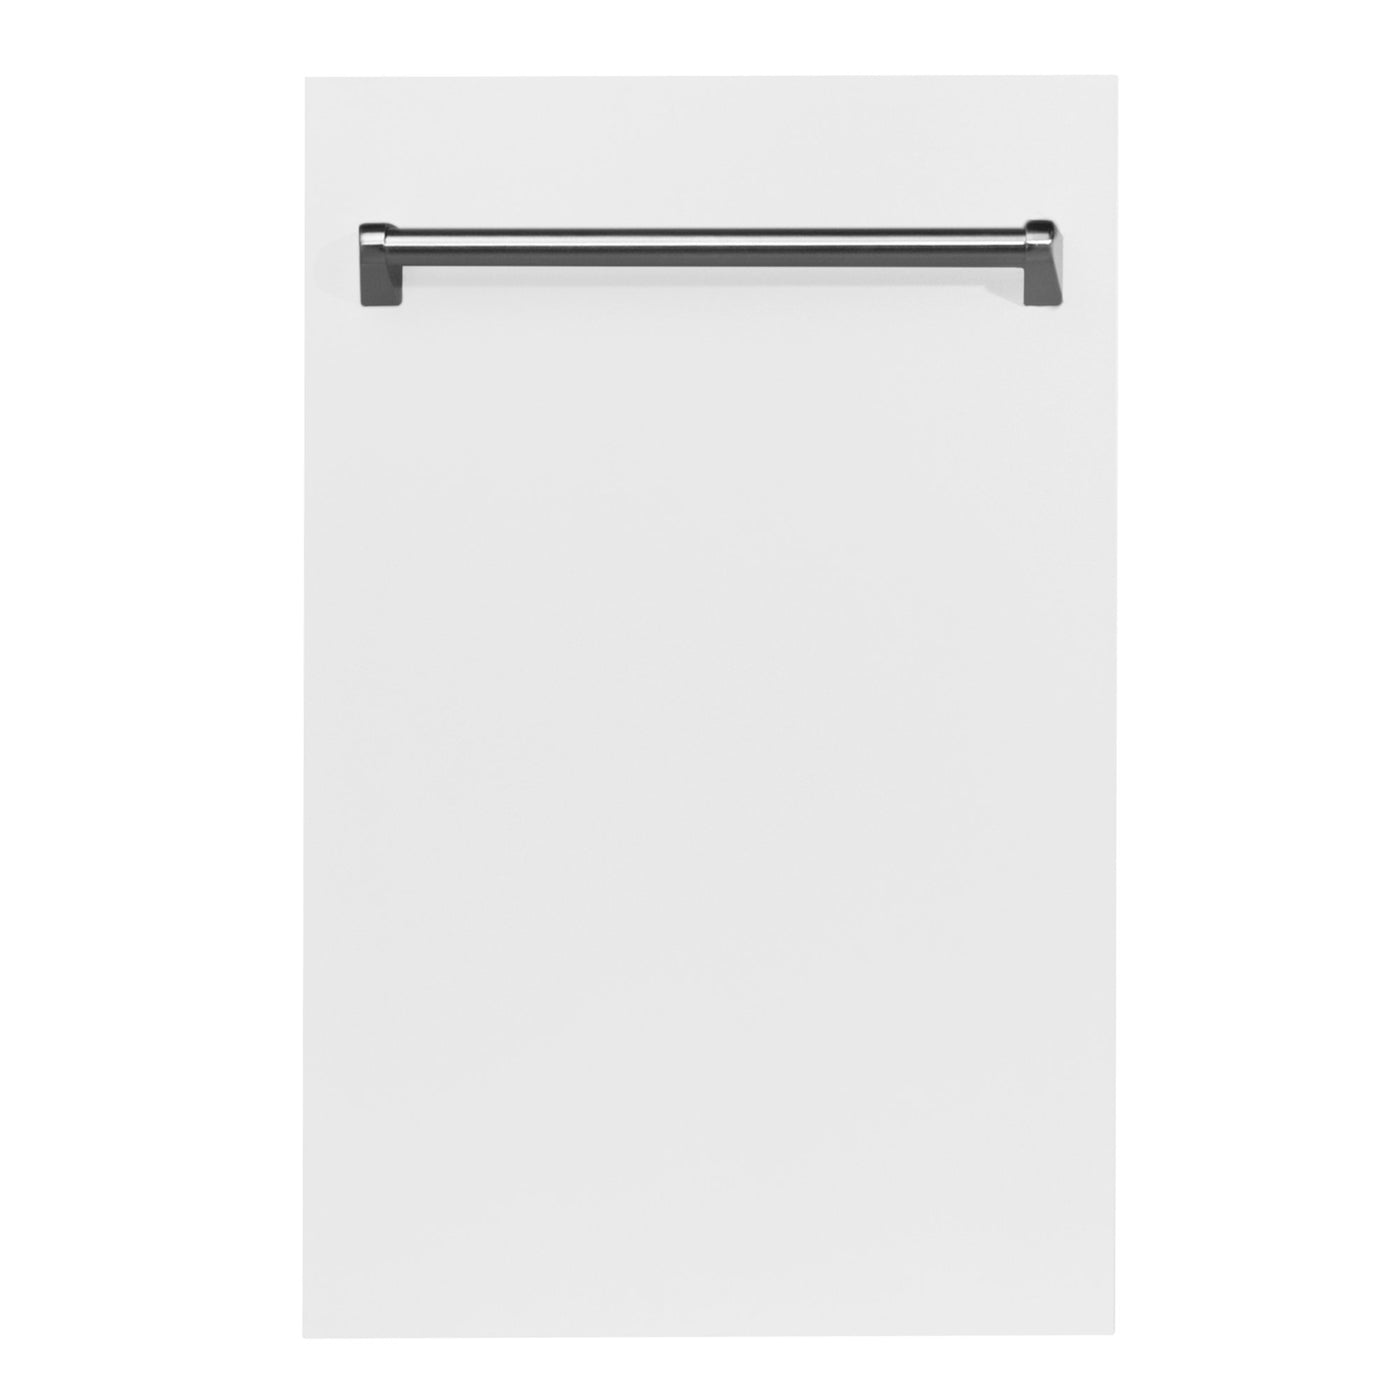 ZLINE Kitchen and Bath, ZLINE 18" Top Control Dishwasher in Custom Panel Ready with Stainless Steel Tub, DW-WM-18, ZLINE 18 in. Top Control Built-In Dishwasher - Custom Panel Ready  | Rustic Kitchen and Bath